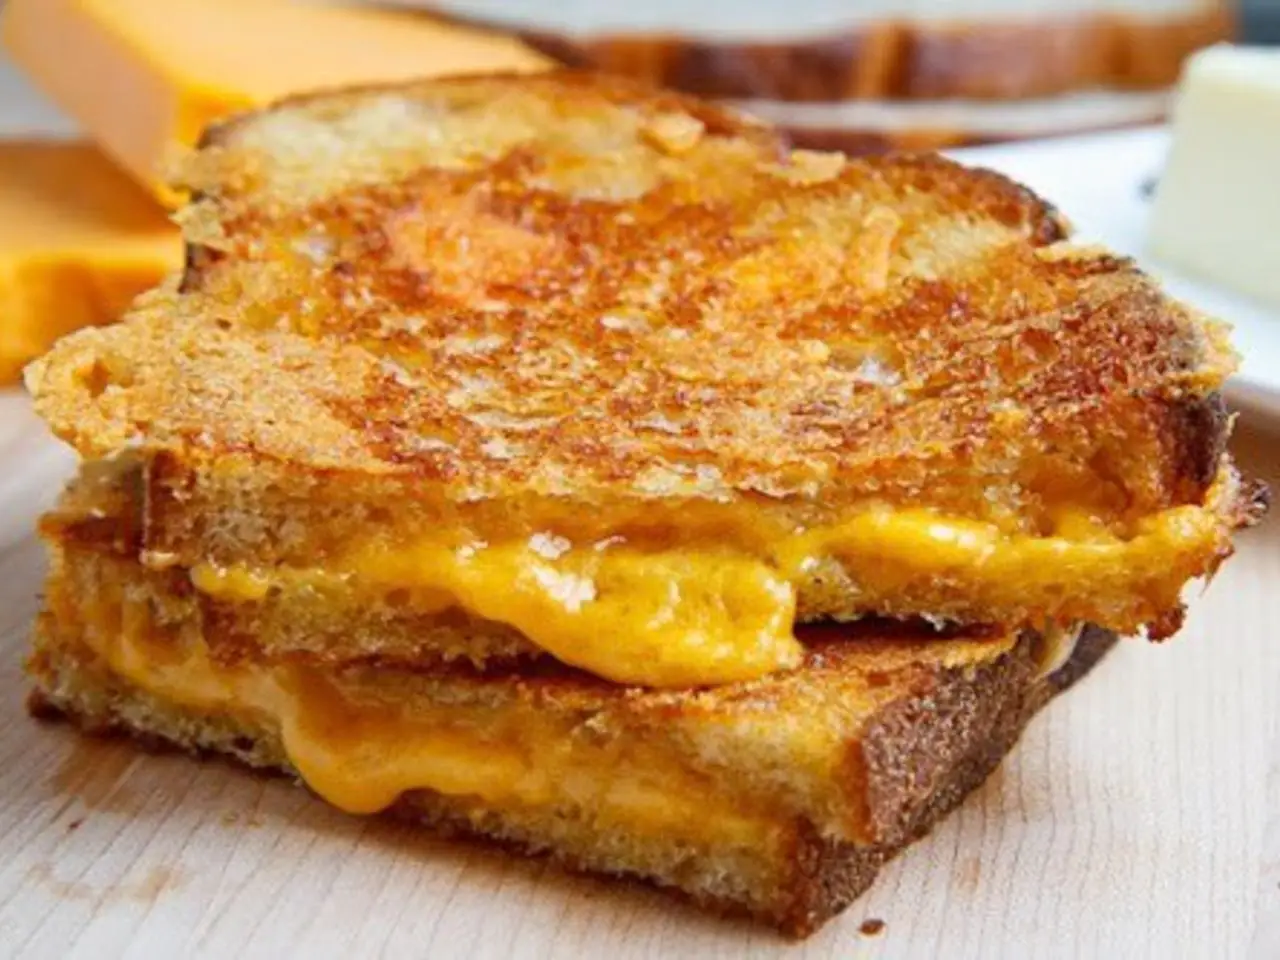 How to Make the Perfect Grilled Cheese Sandwich Recipe ...